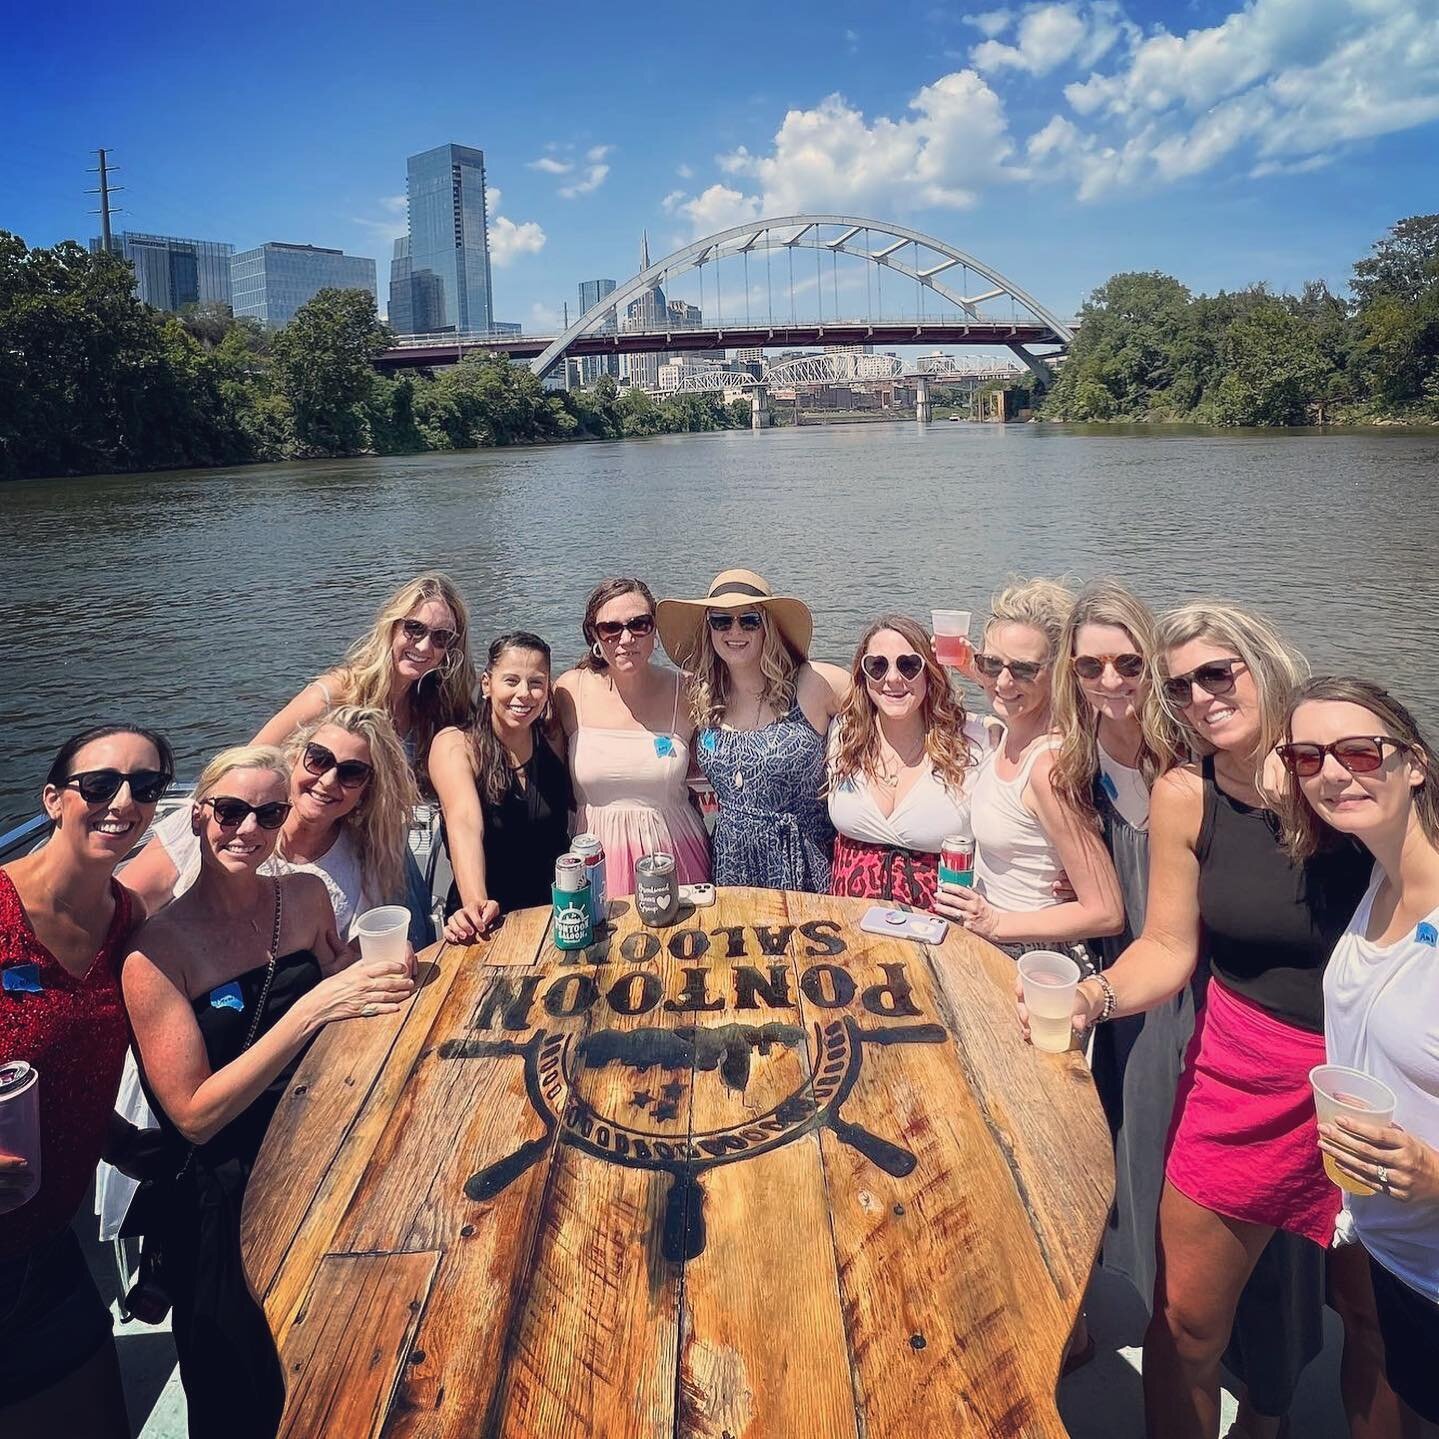 Anchors away! We had a BLAST kicking off our inaugural year with our Moms&rsquo; Mimosa Cruise on @pontoonsaloon! A BIG thanks to all that came out, and especially our incredible social chairs @wineswithamy @lindzy45 for putting it all together! 🥂🛥